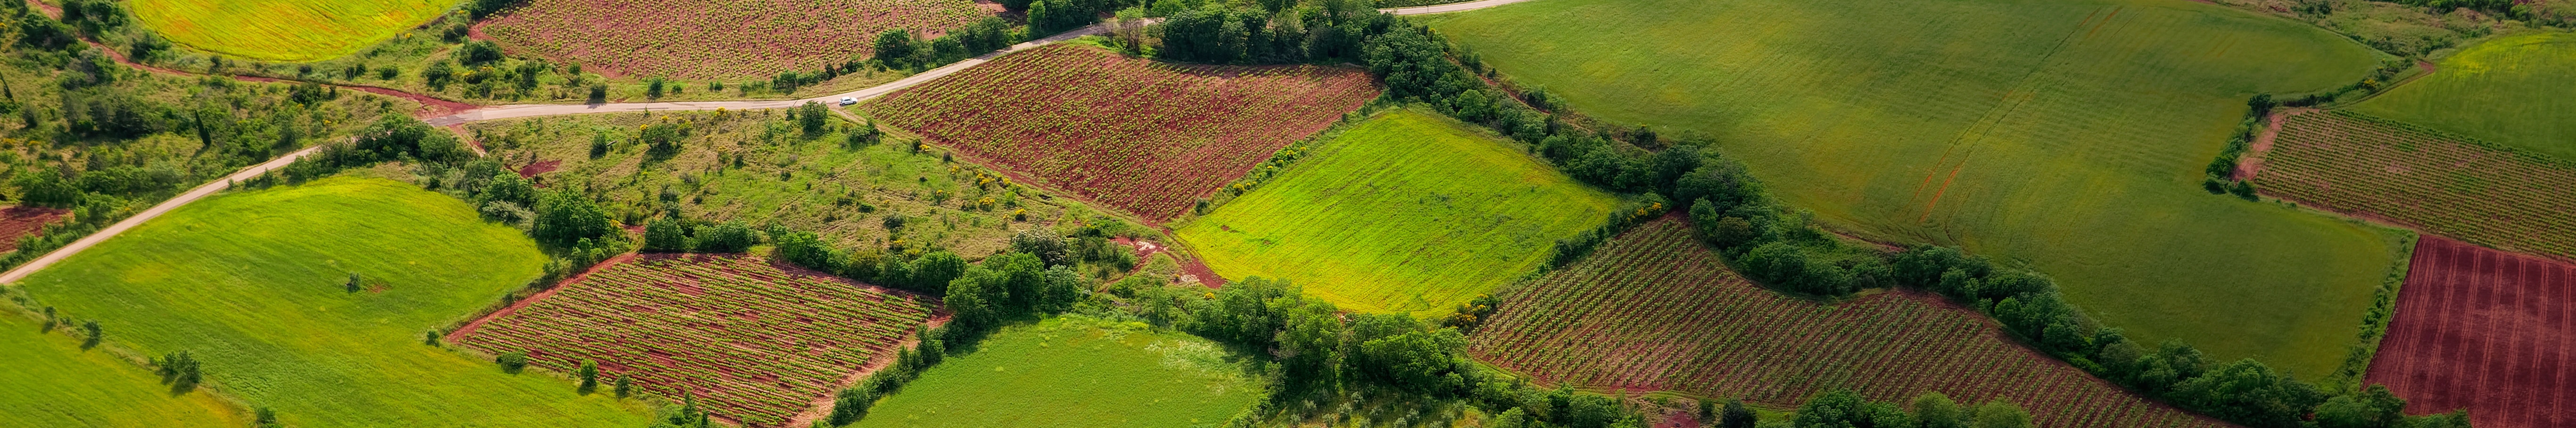 EDF's power generation used an estimated 3.5 million hectares of land, affecting biodiversity